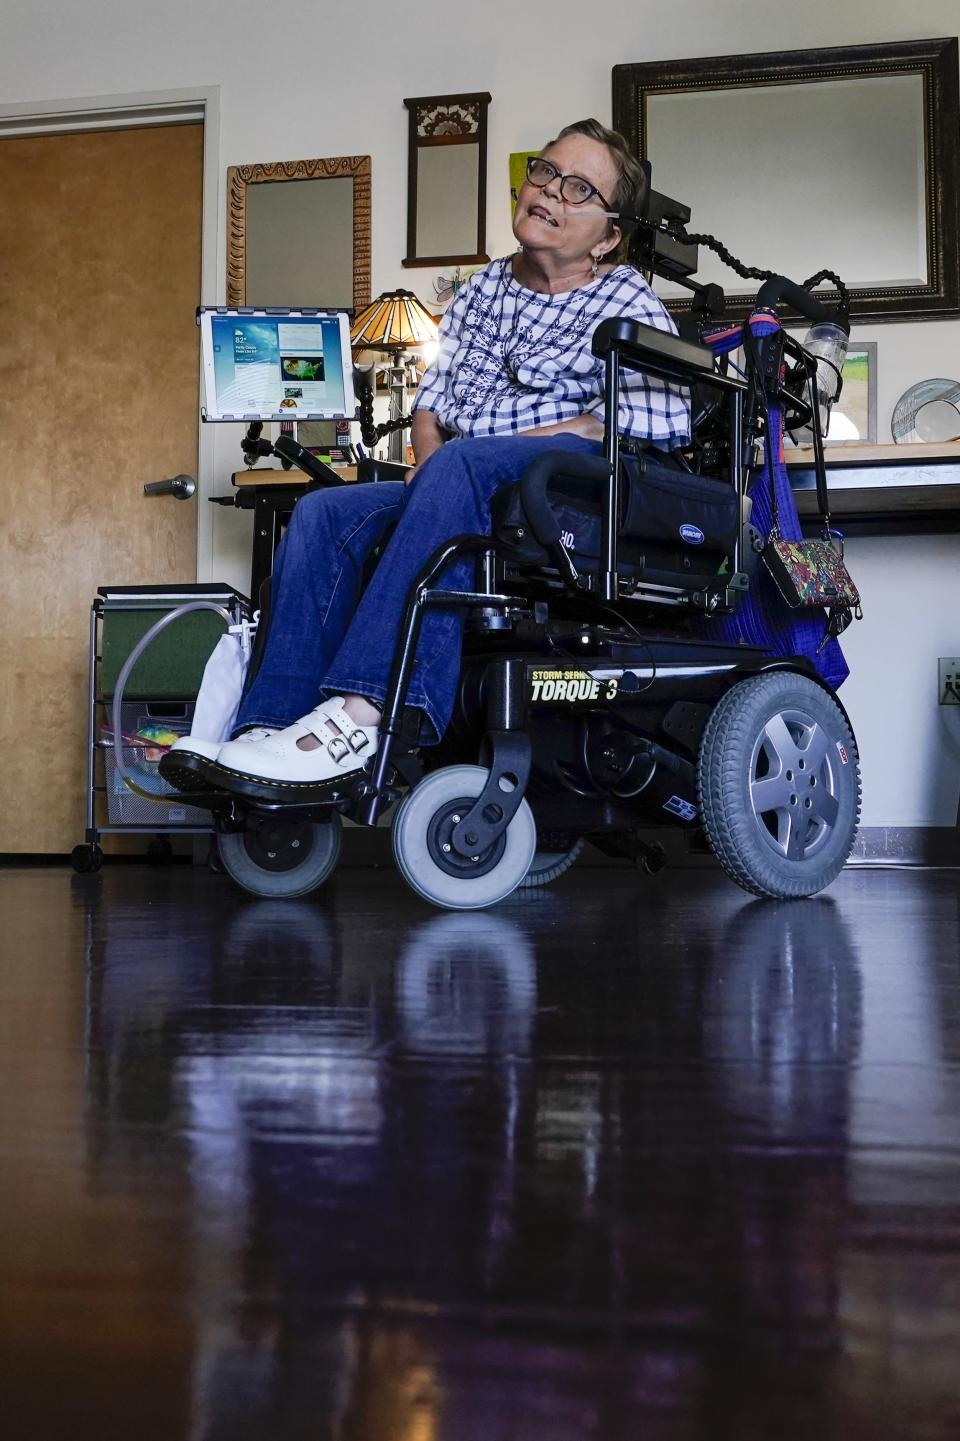 Martha Chambers pose in her apartment Friday, Sept. 2, 2022, in Milwaukee. Wisconsin voters with disabilities are celebrating a win after a federal judge, citing the Voting Rights Act, ruled that they may get assistance returning their ballots. (AP Photo/Morry Gash)